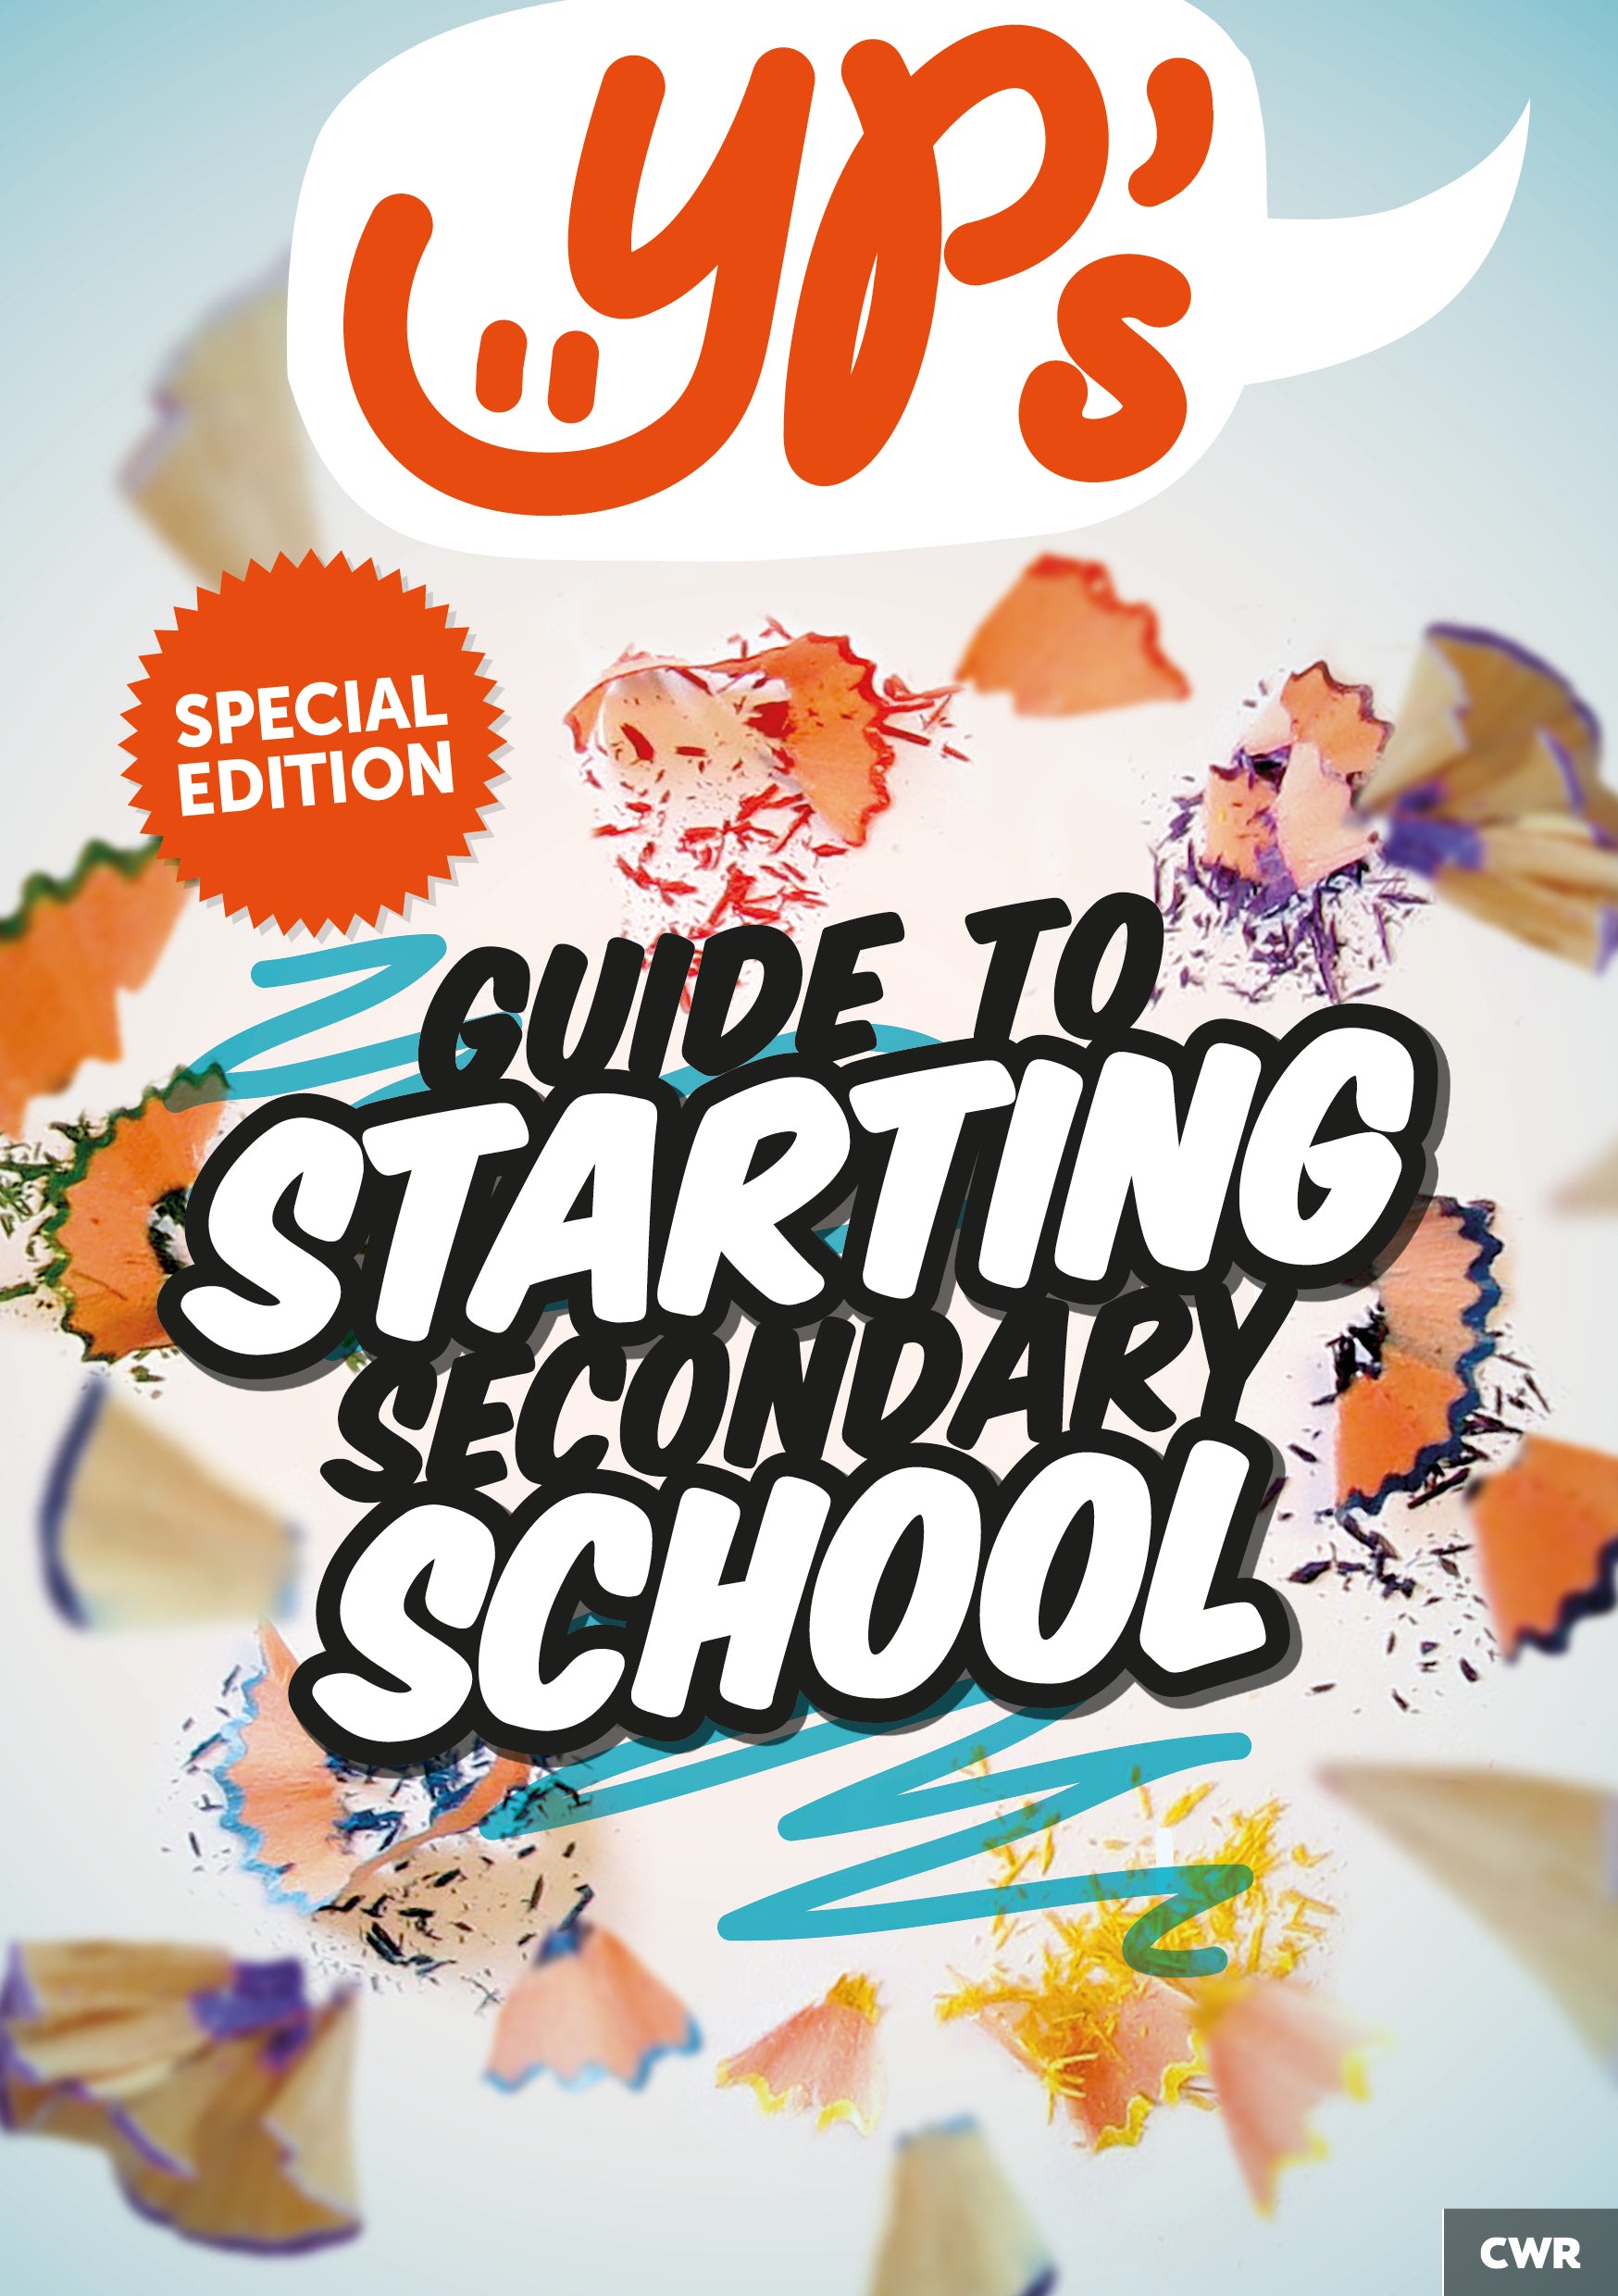 Image of YP's Guide To Starting Secondary School other